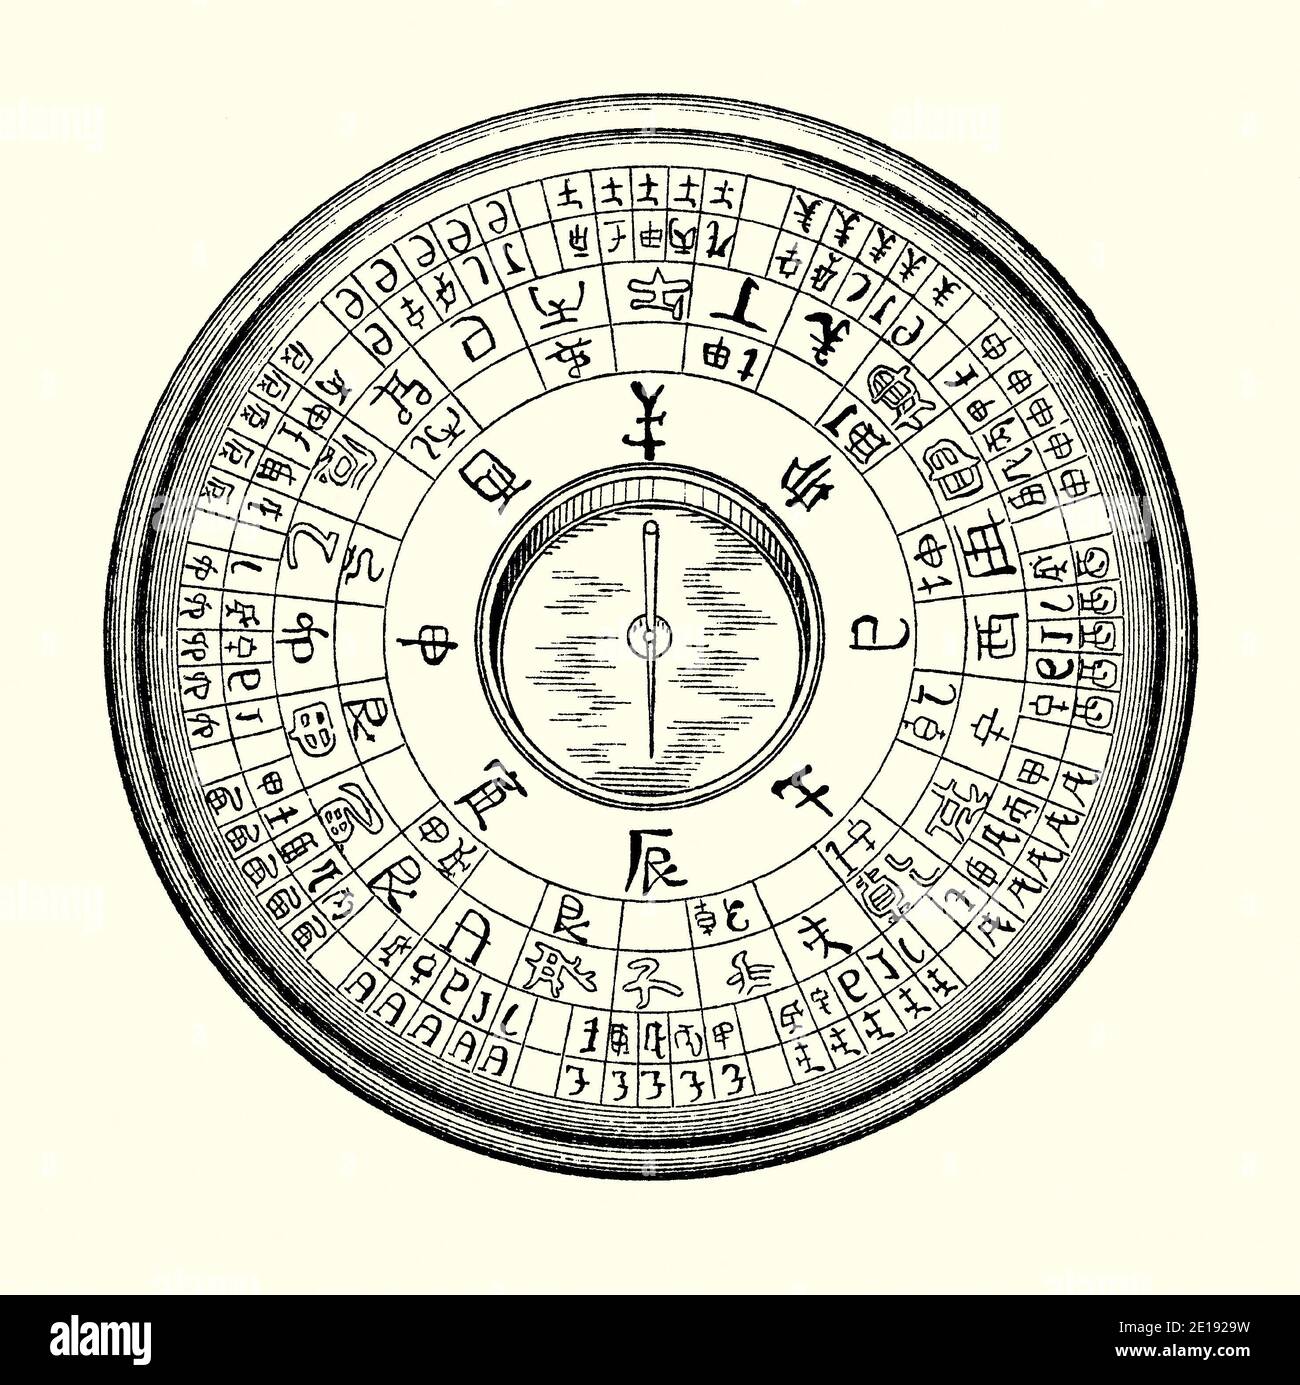 An old engraving of mariner’s compass with Chinese directional points. It is from a Victorian book of the 1880s. This compass has the small magnetic steel needle contained within a copper cup and points south. The 8 main directional compass points are shown in the inner circle – the concentric circles outside of this include the portions of the day and further, larger, chronological cycles. The magnetic compass was used for interpreting symbols and fortune-telling, possibly to harmonise buildings and interiors in accordance with the geomantic principles of feng shui. Stock Photo